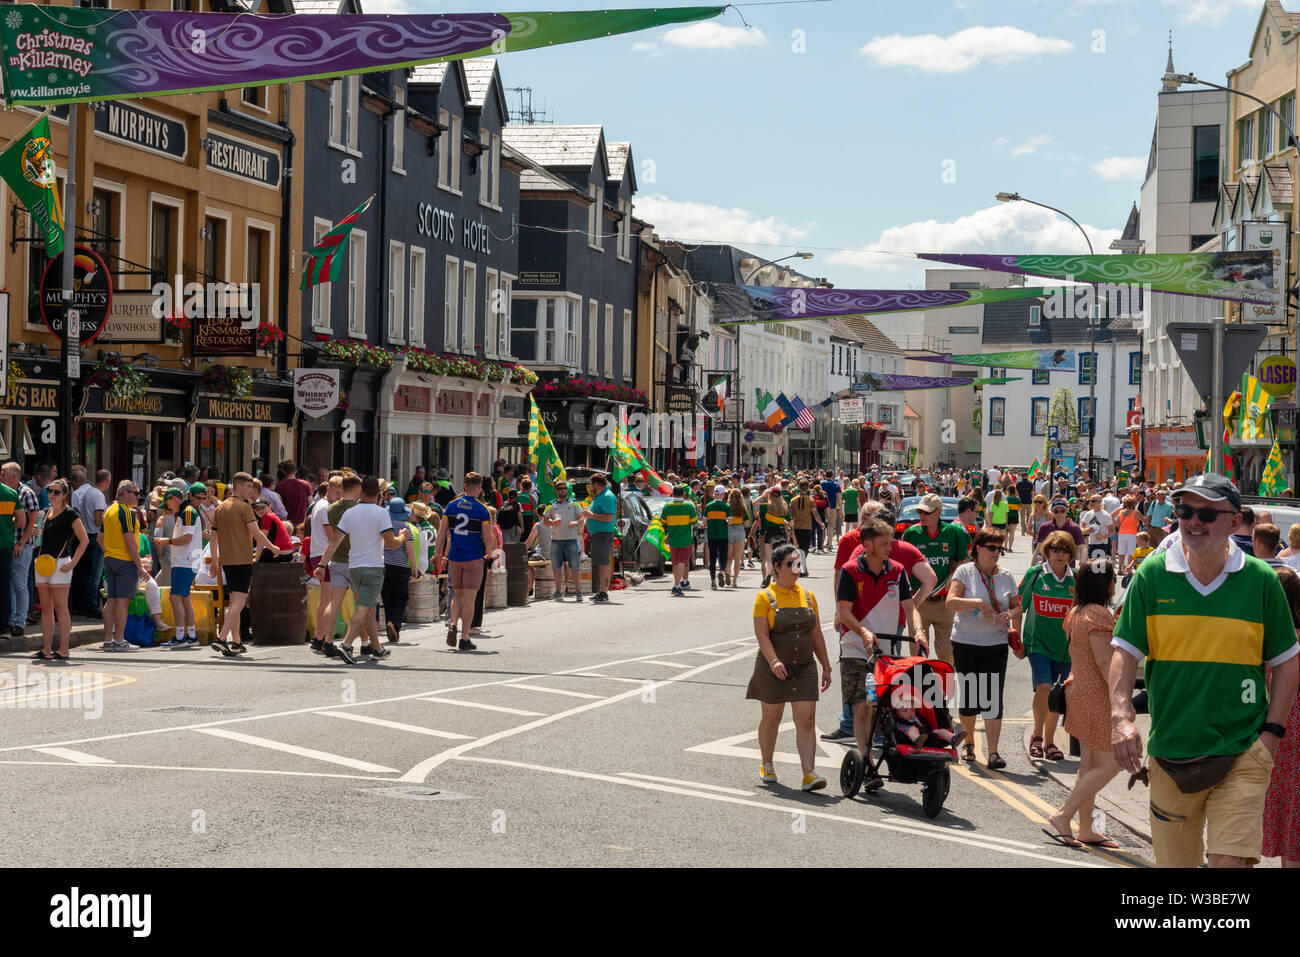 Match day in Killarney, County Kerry, Ireland. Gaelic football fans supporters on the College Street before the Mayo and Kerry game in July 2019. Stock Photo